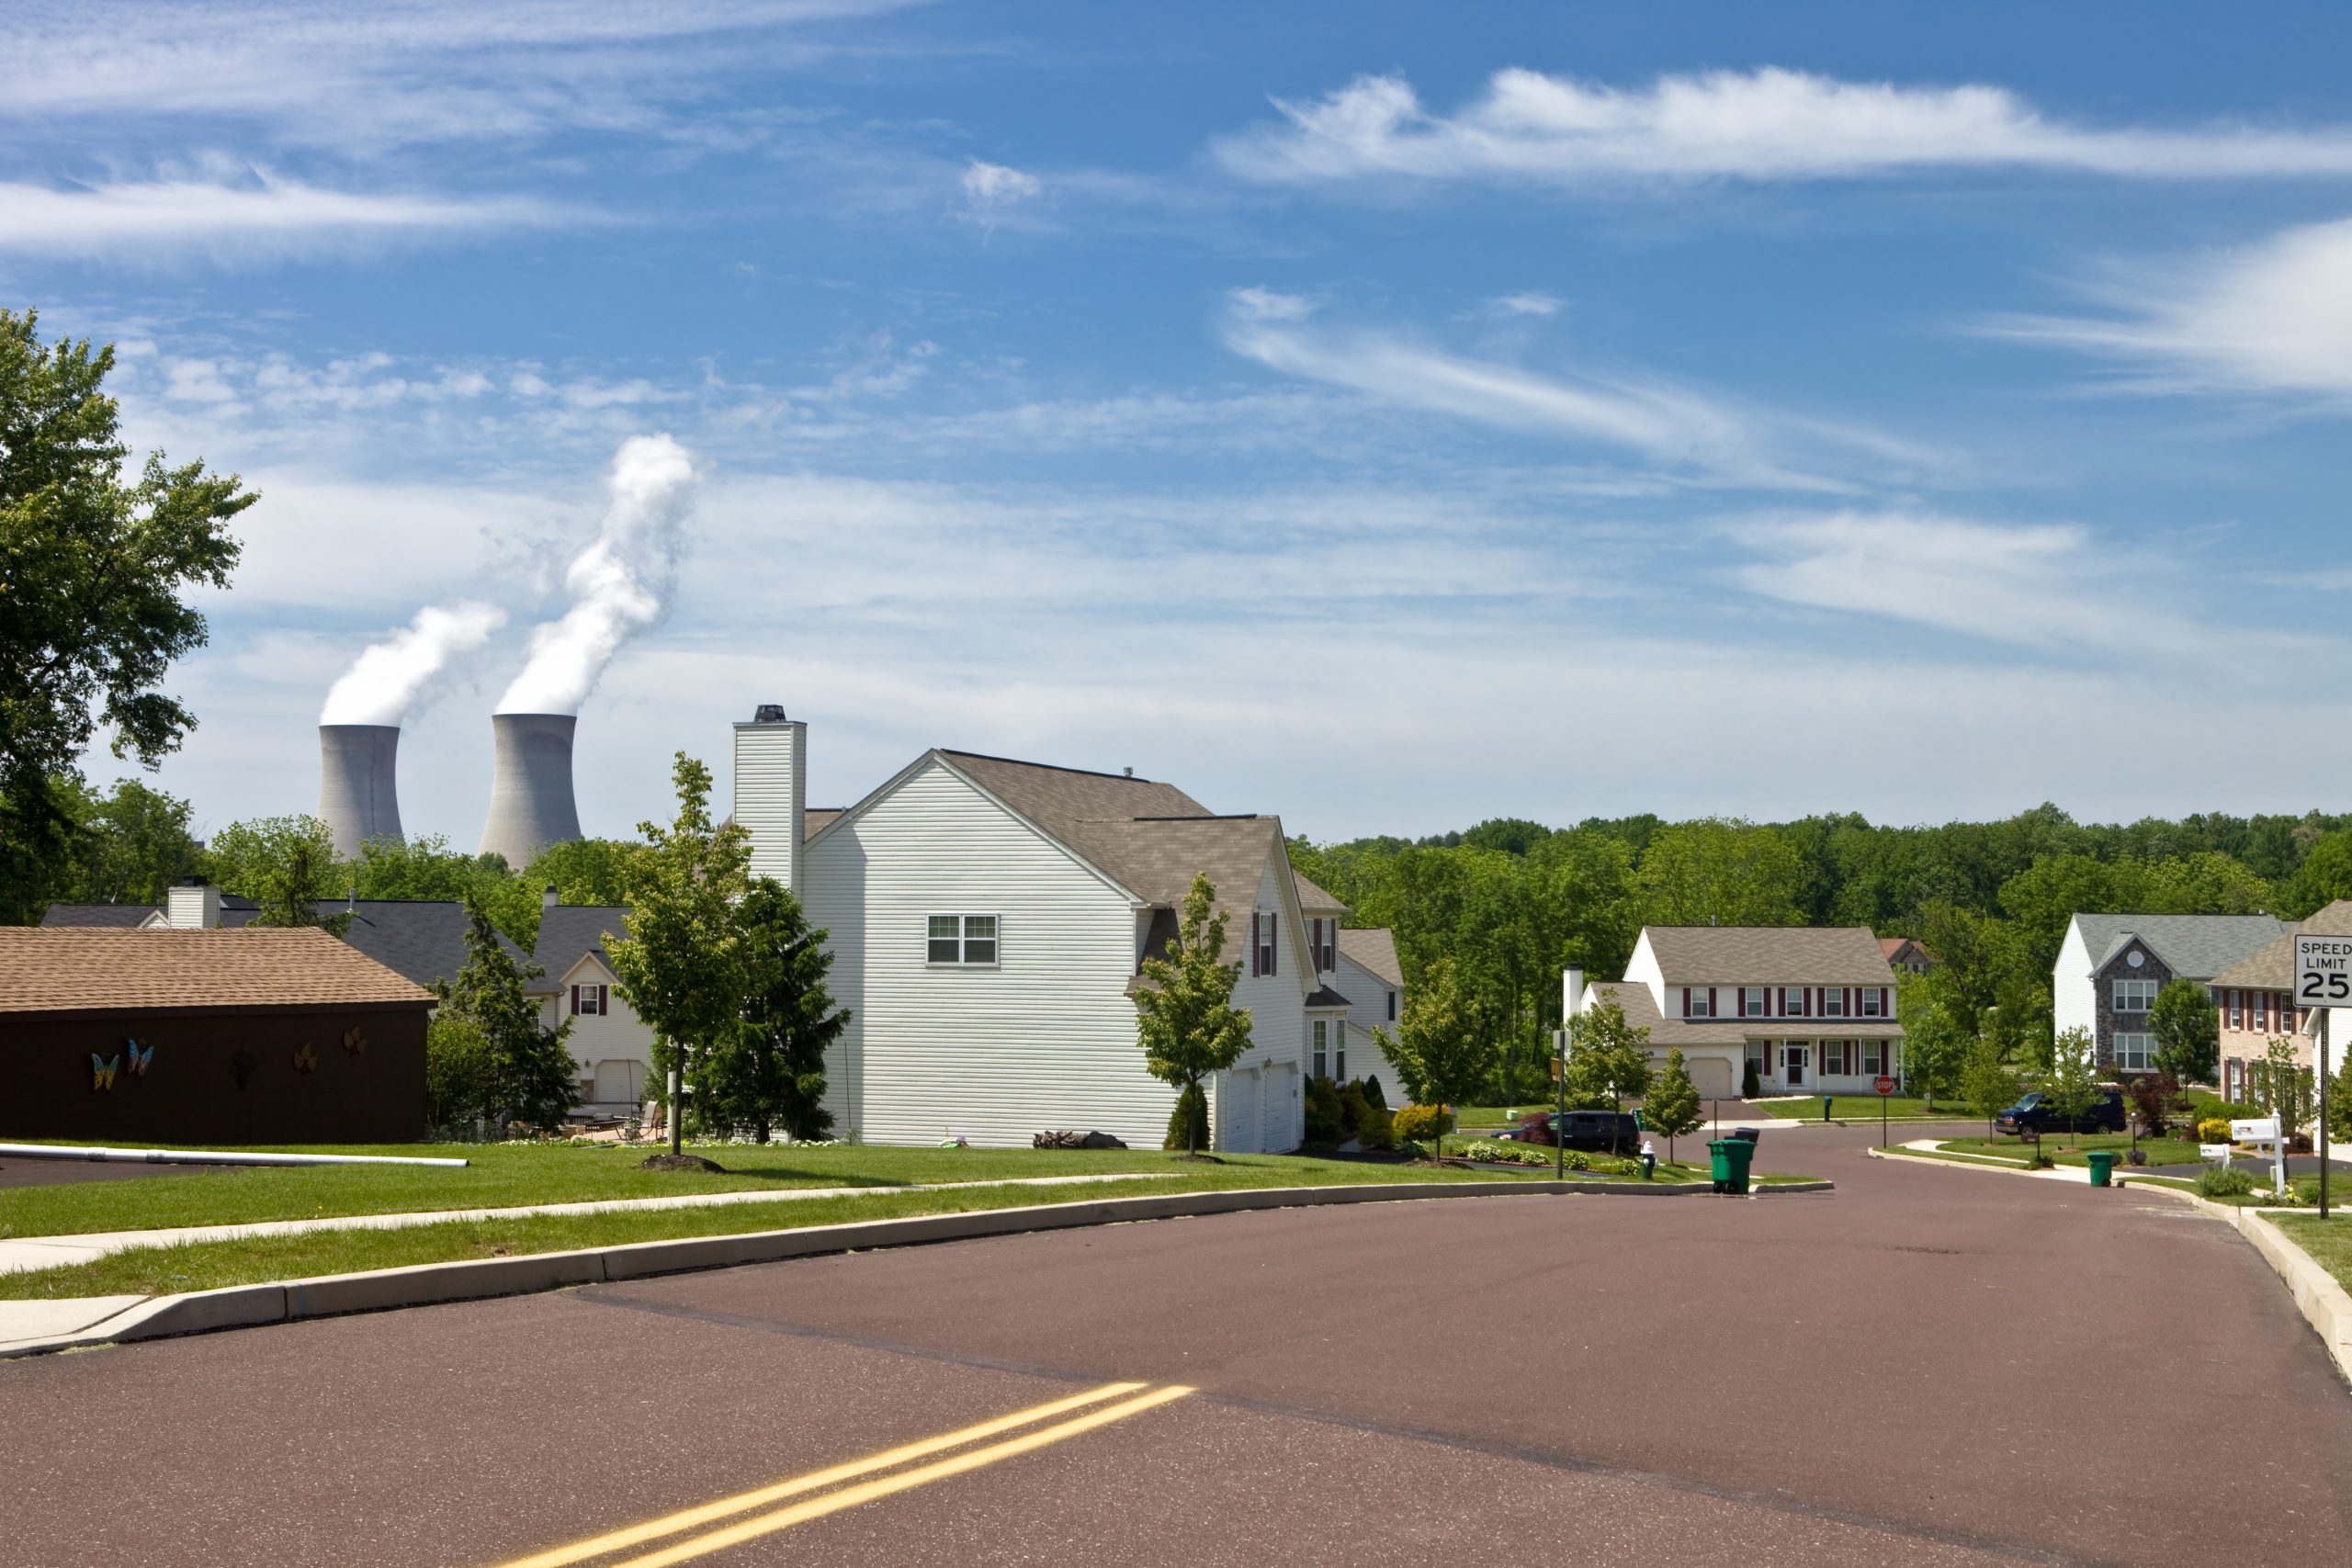 Suburban house with nuclear plant in background